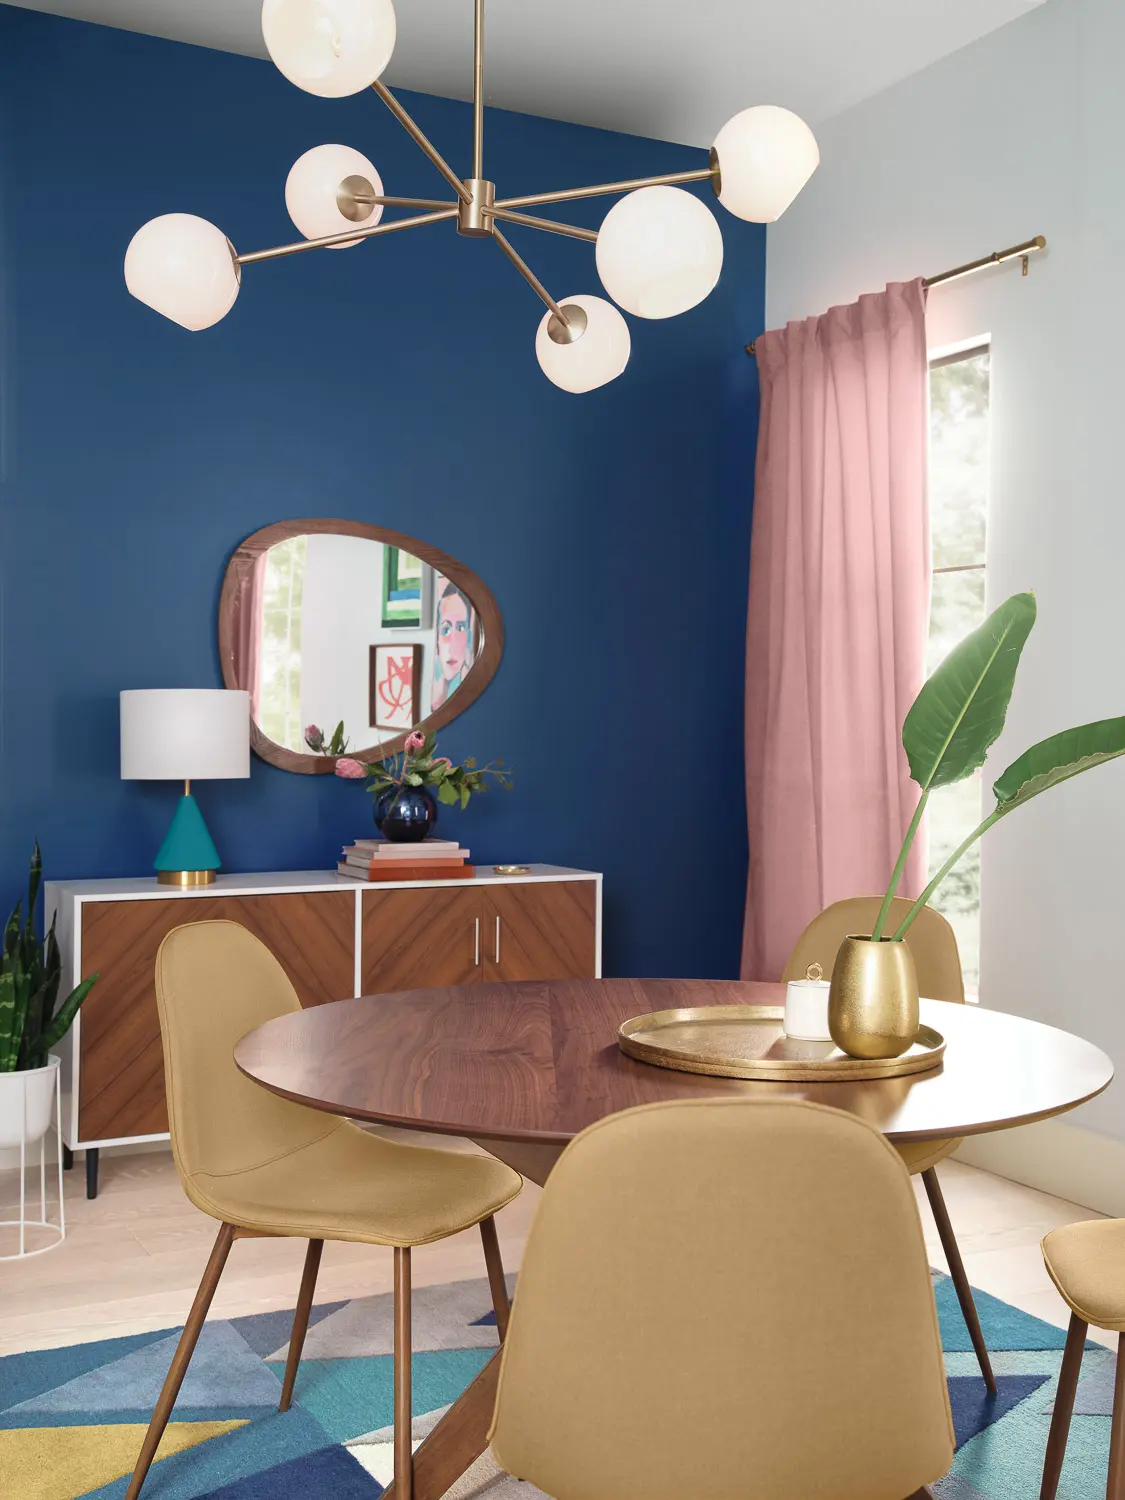 Midcentury modern Dining Room with mirror on the wall and dining room table